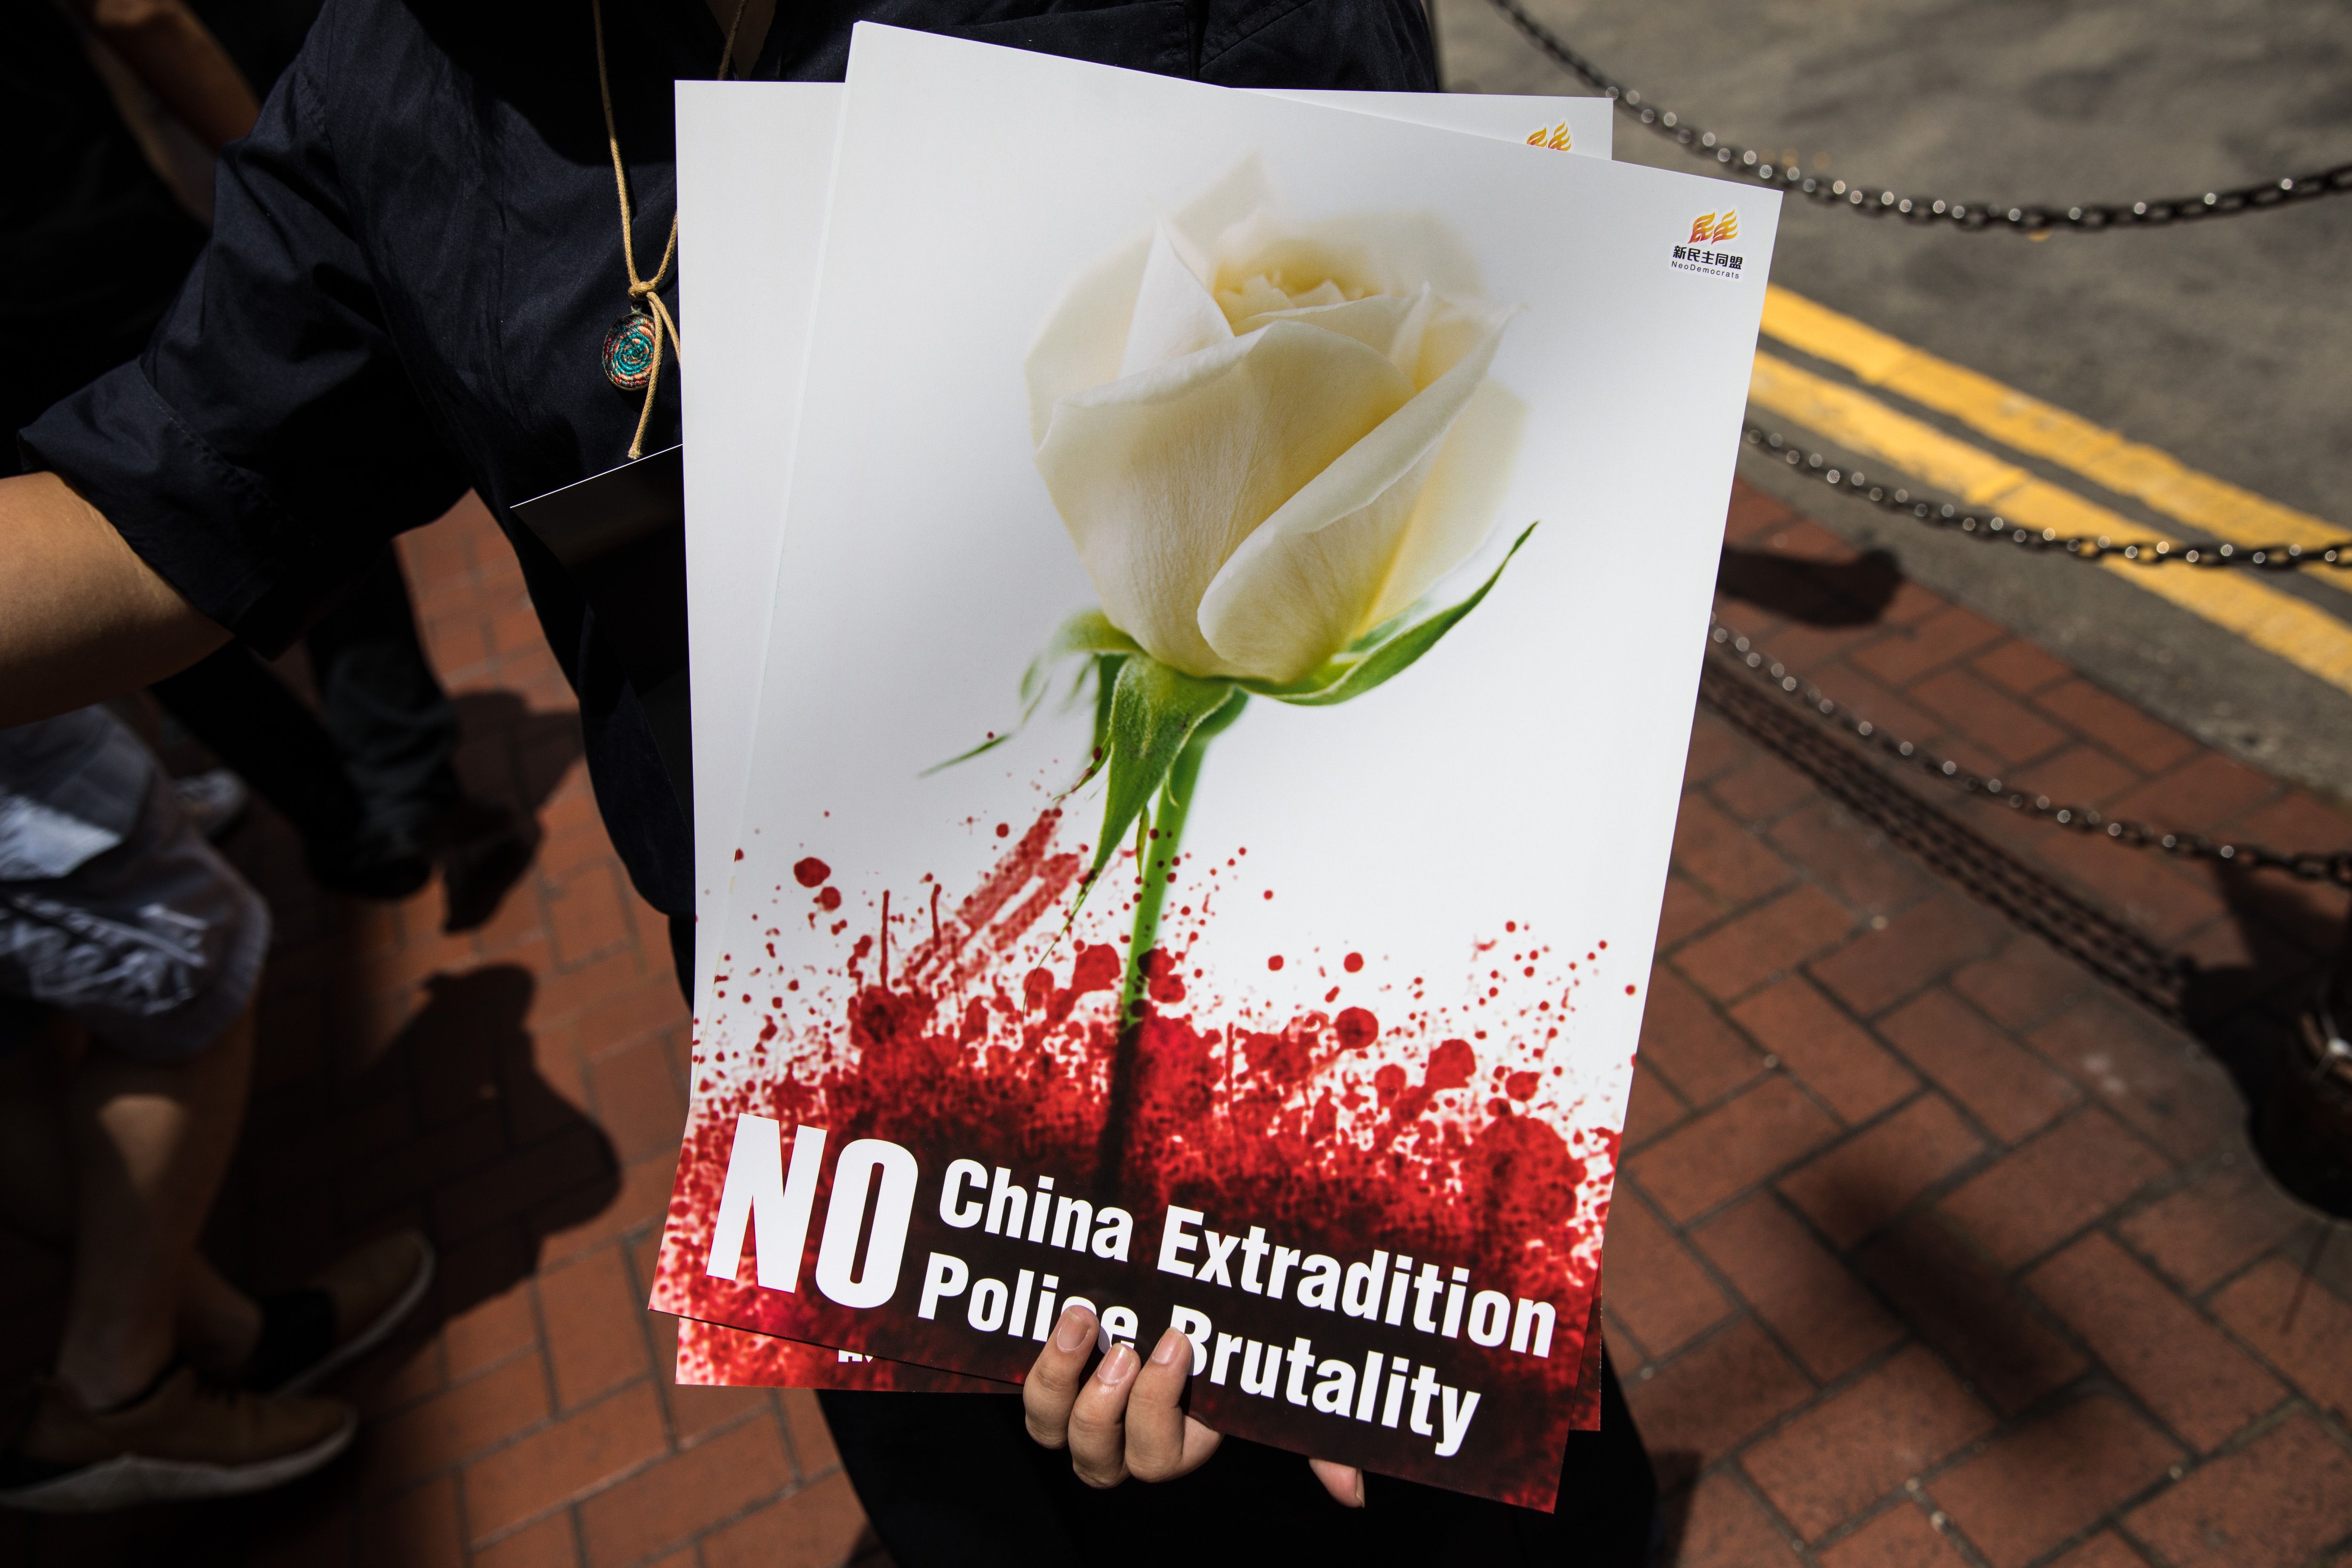 A protester hands out posters before a rally against a controversial extradition law proposal in Hong Kong on June 16, 2019.